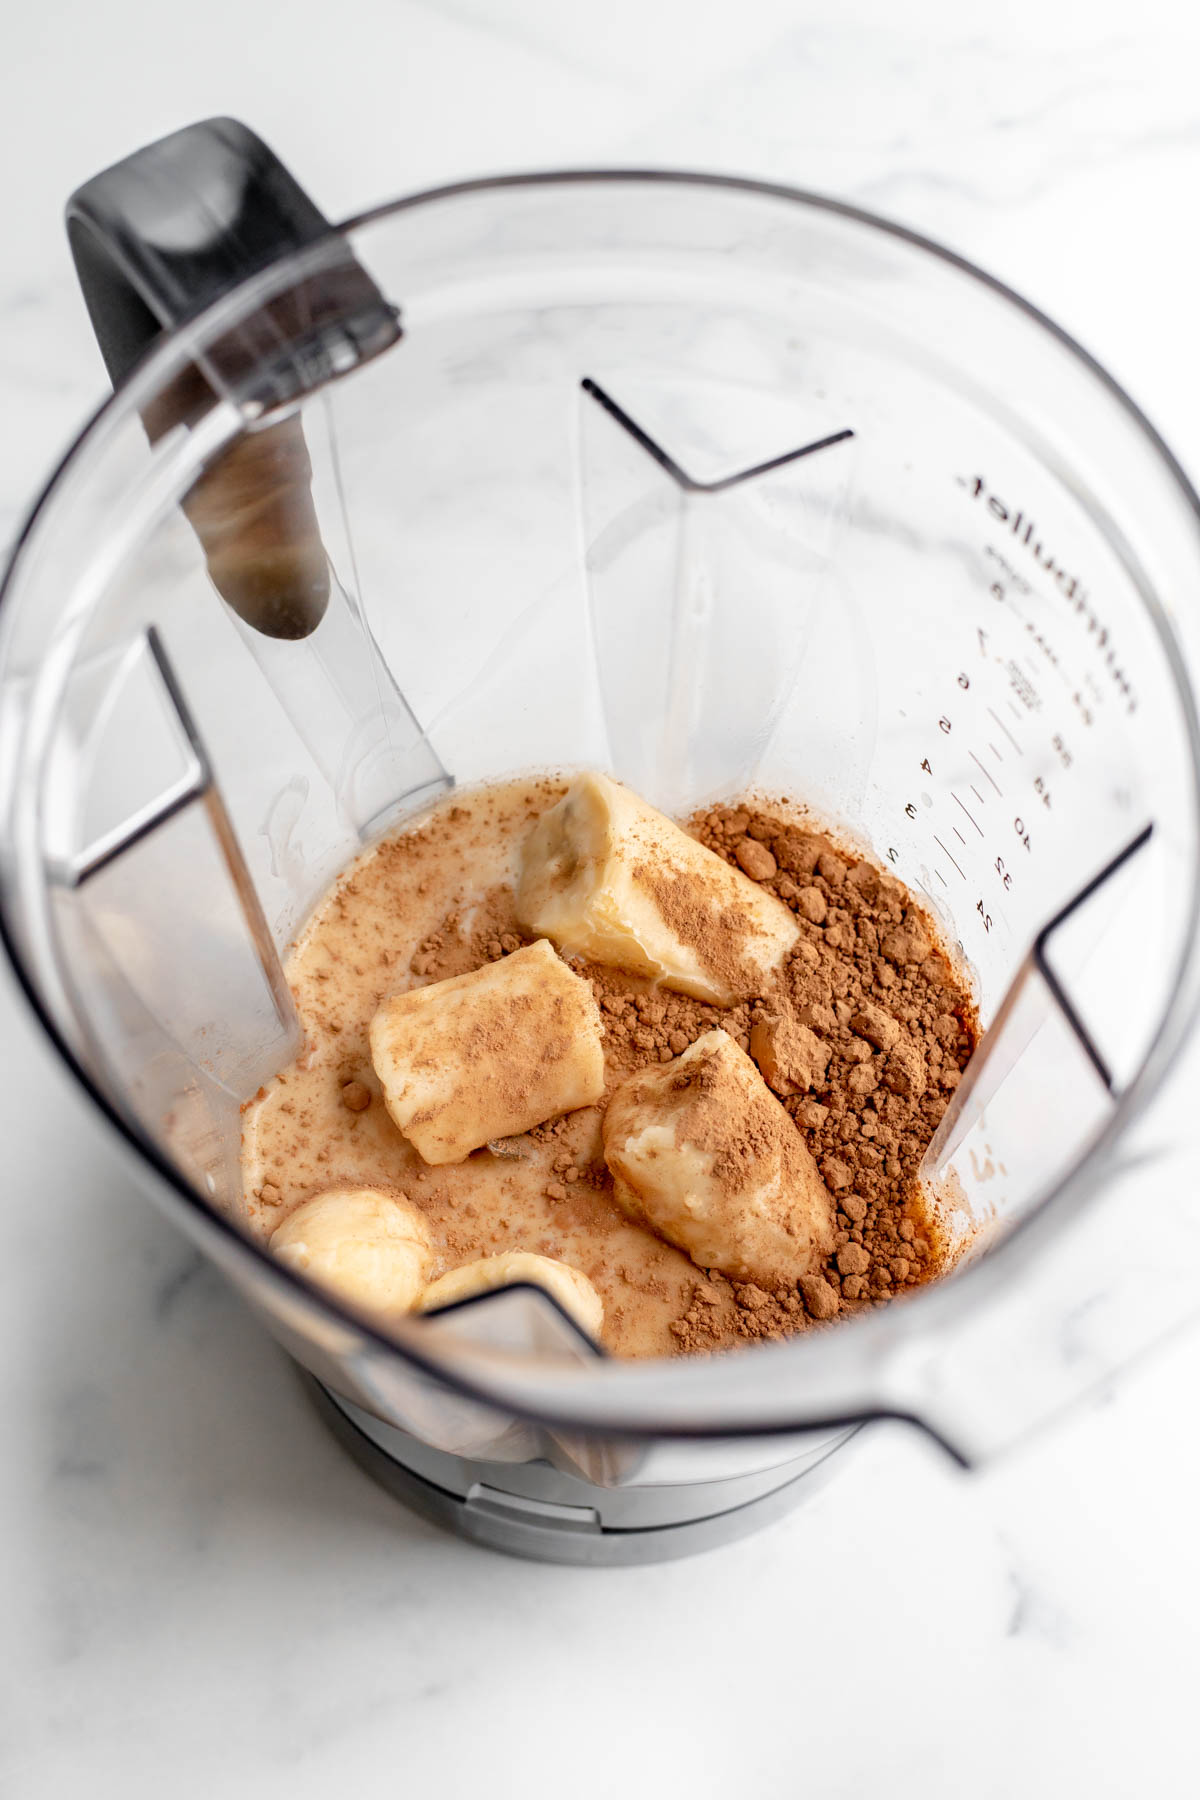 Bananas, milk, and cocoa powder in a blender